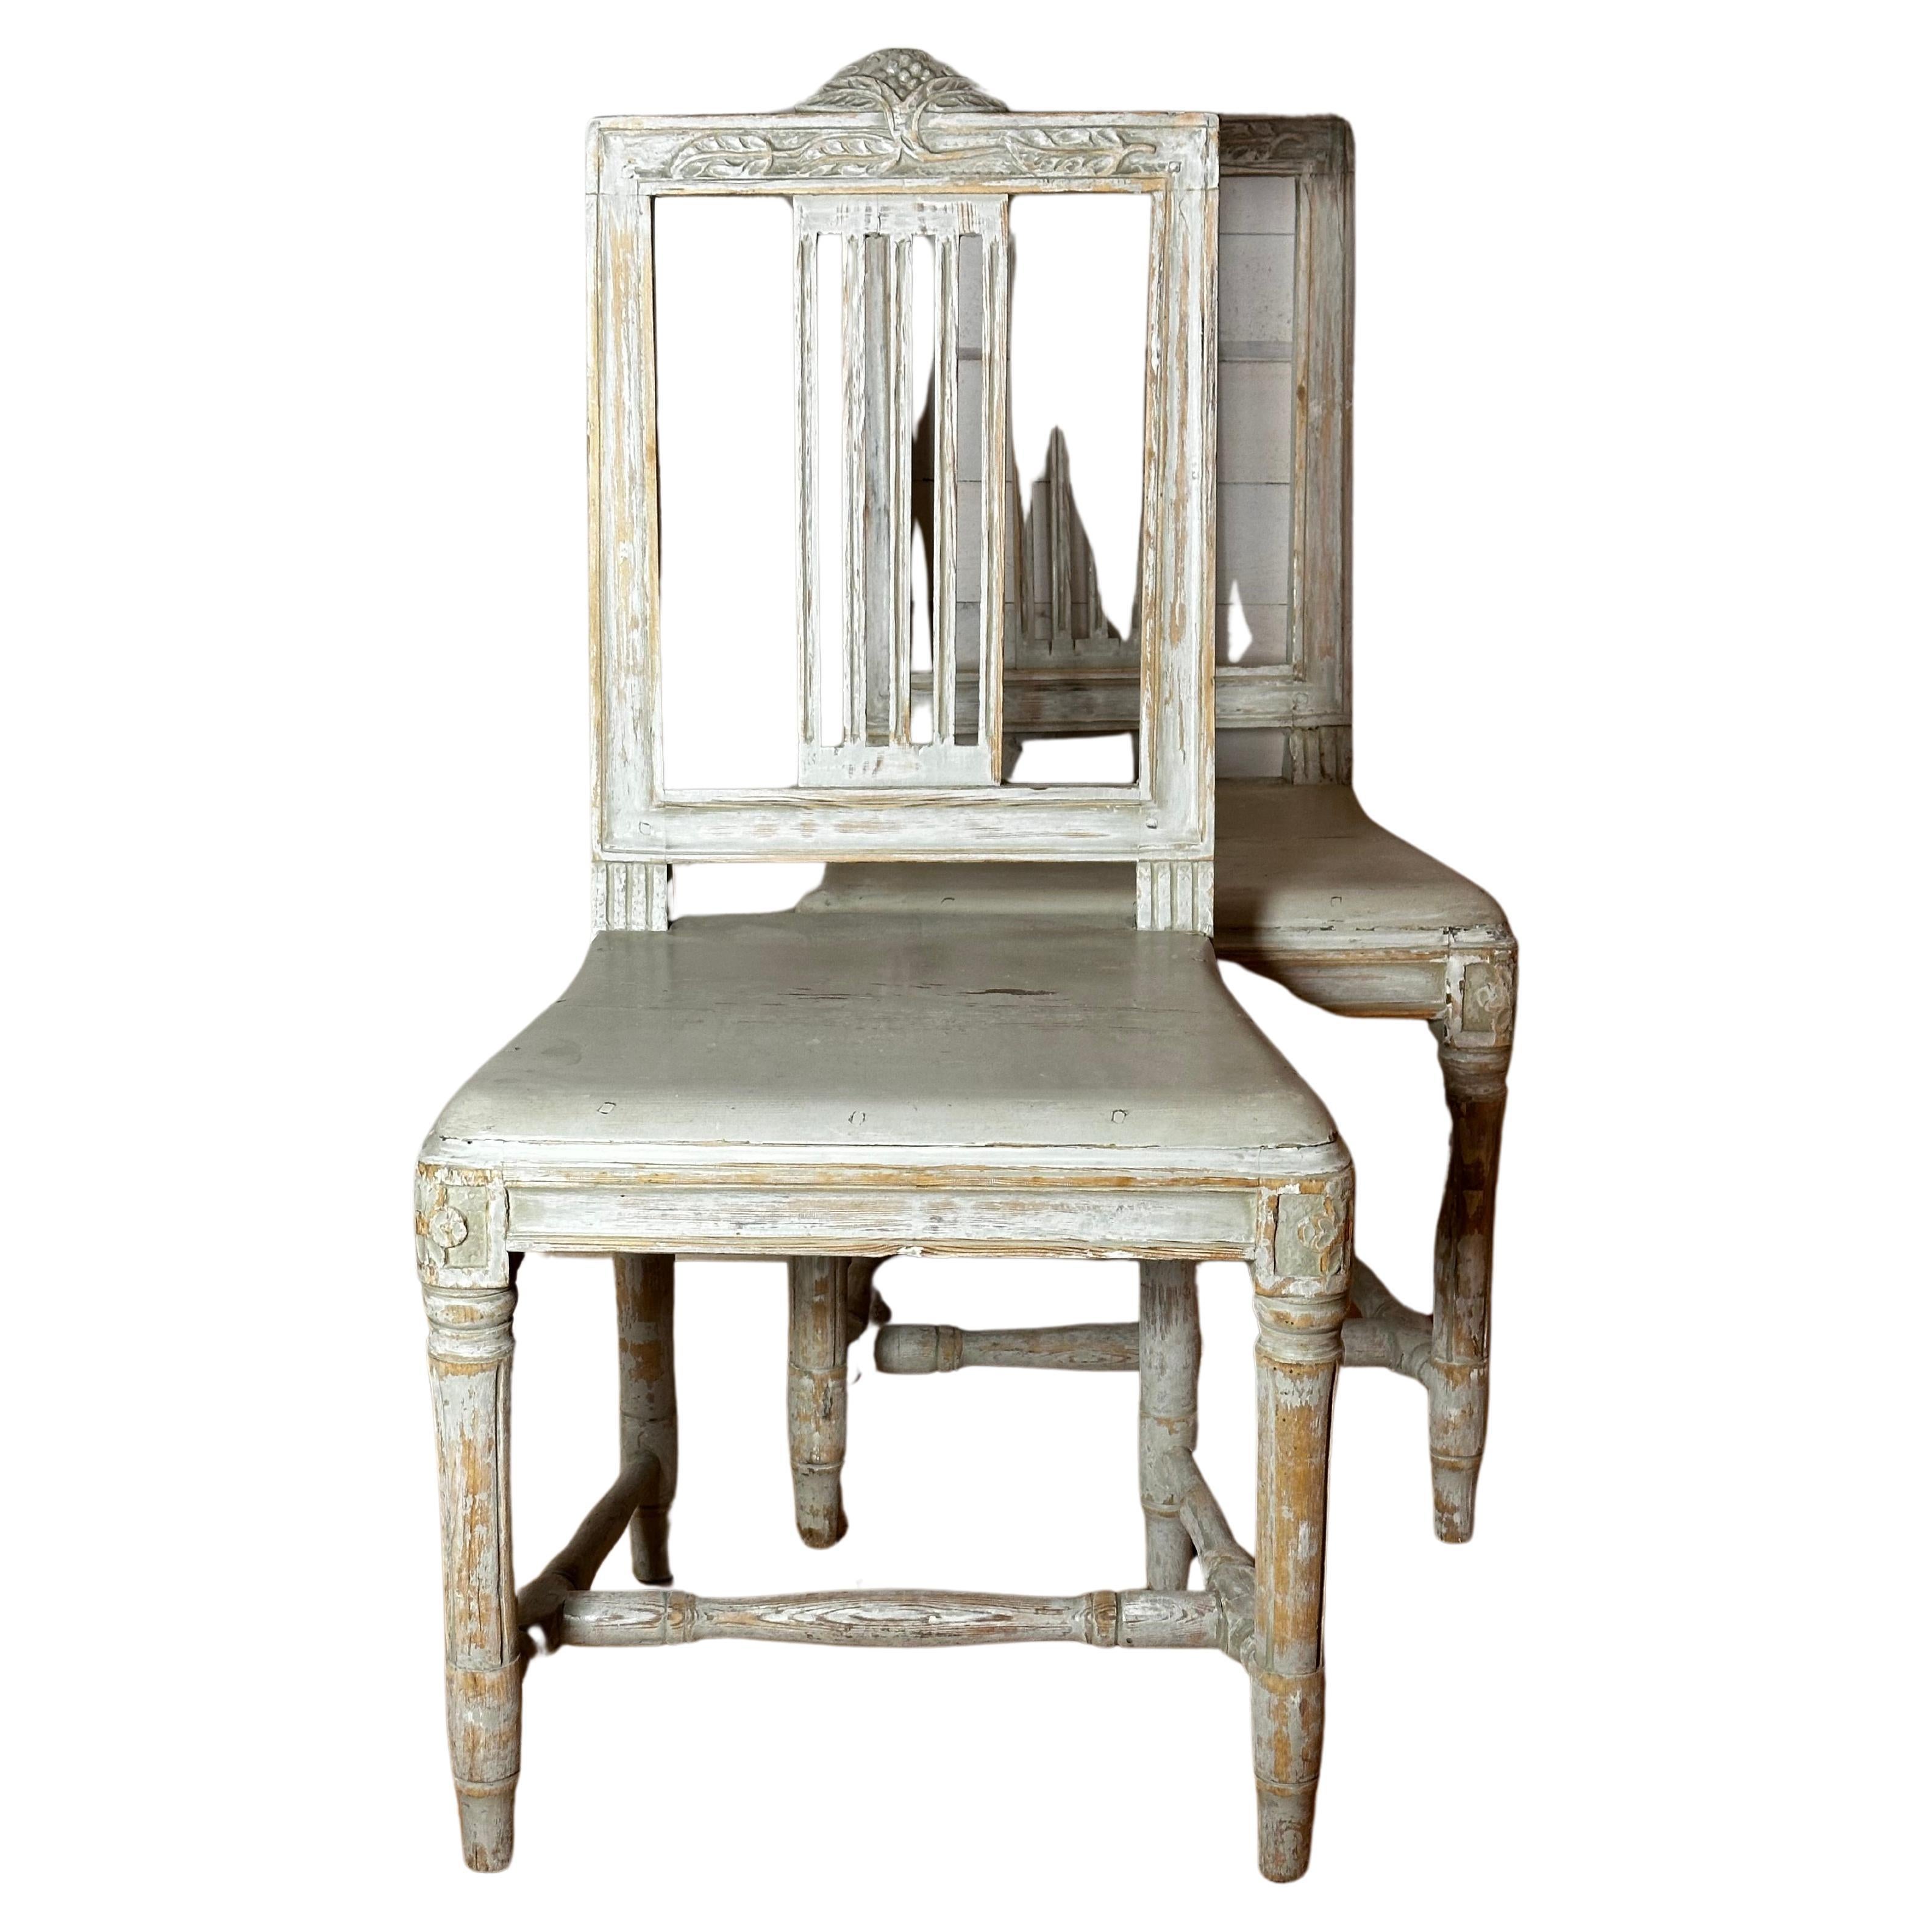 Early 19th Century chairs